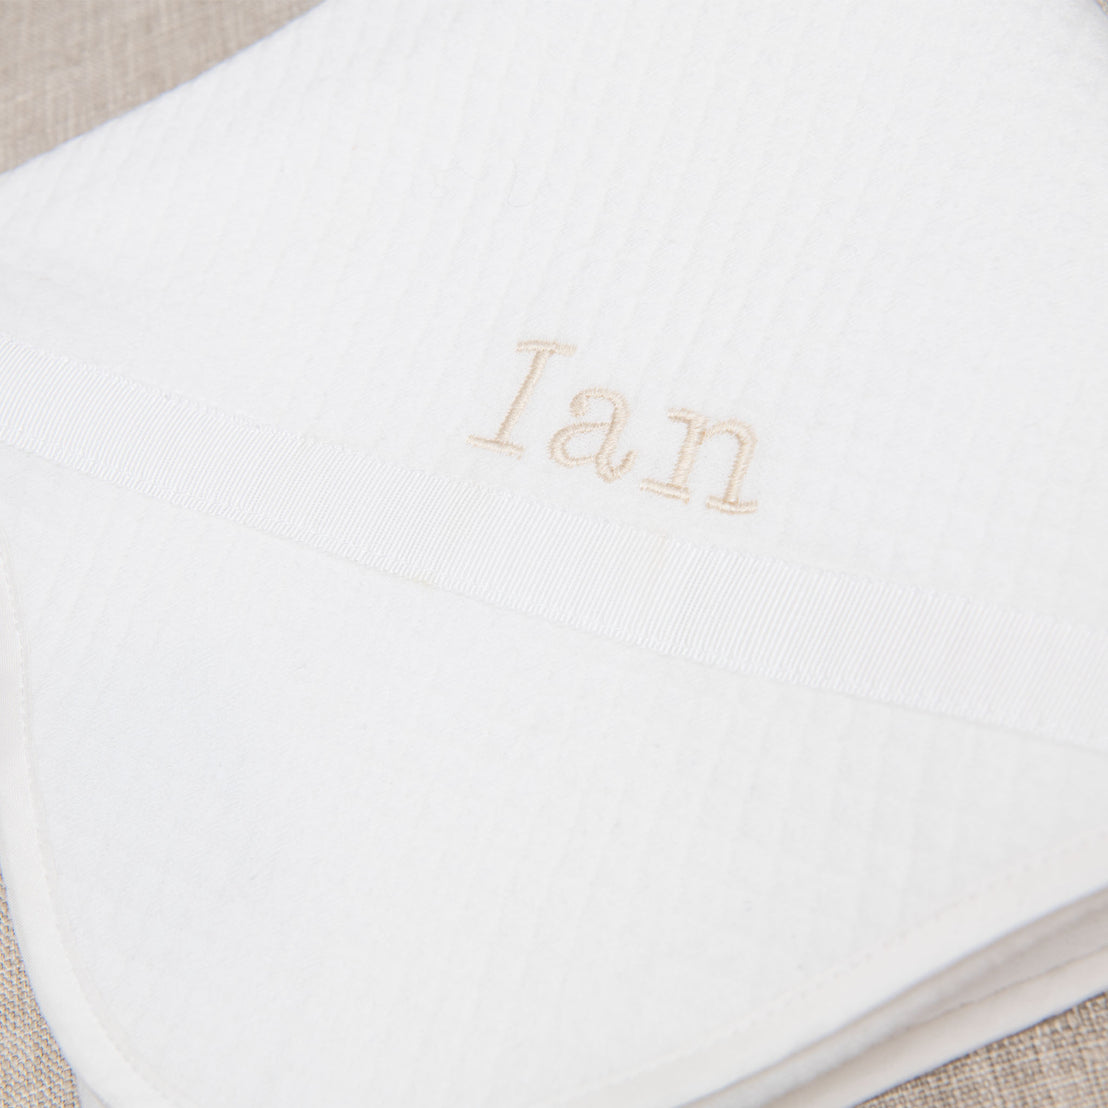 Close-up view of a designer white baby blanket with a gray stripe and the name "Ian" embroidered in beige thread.